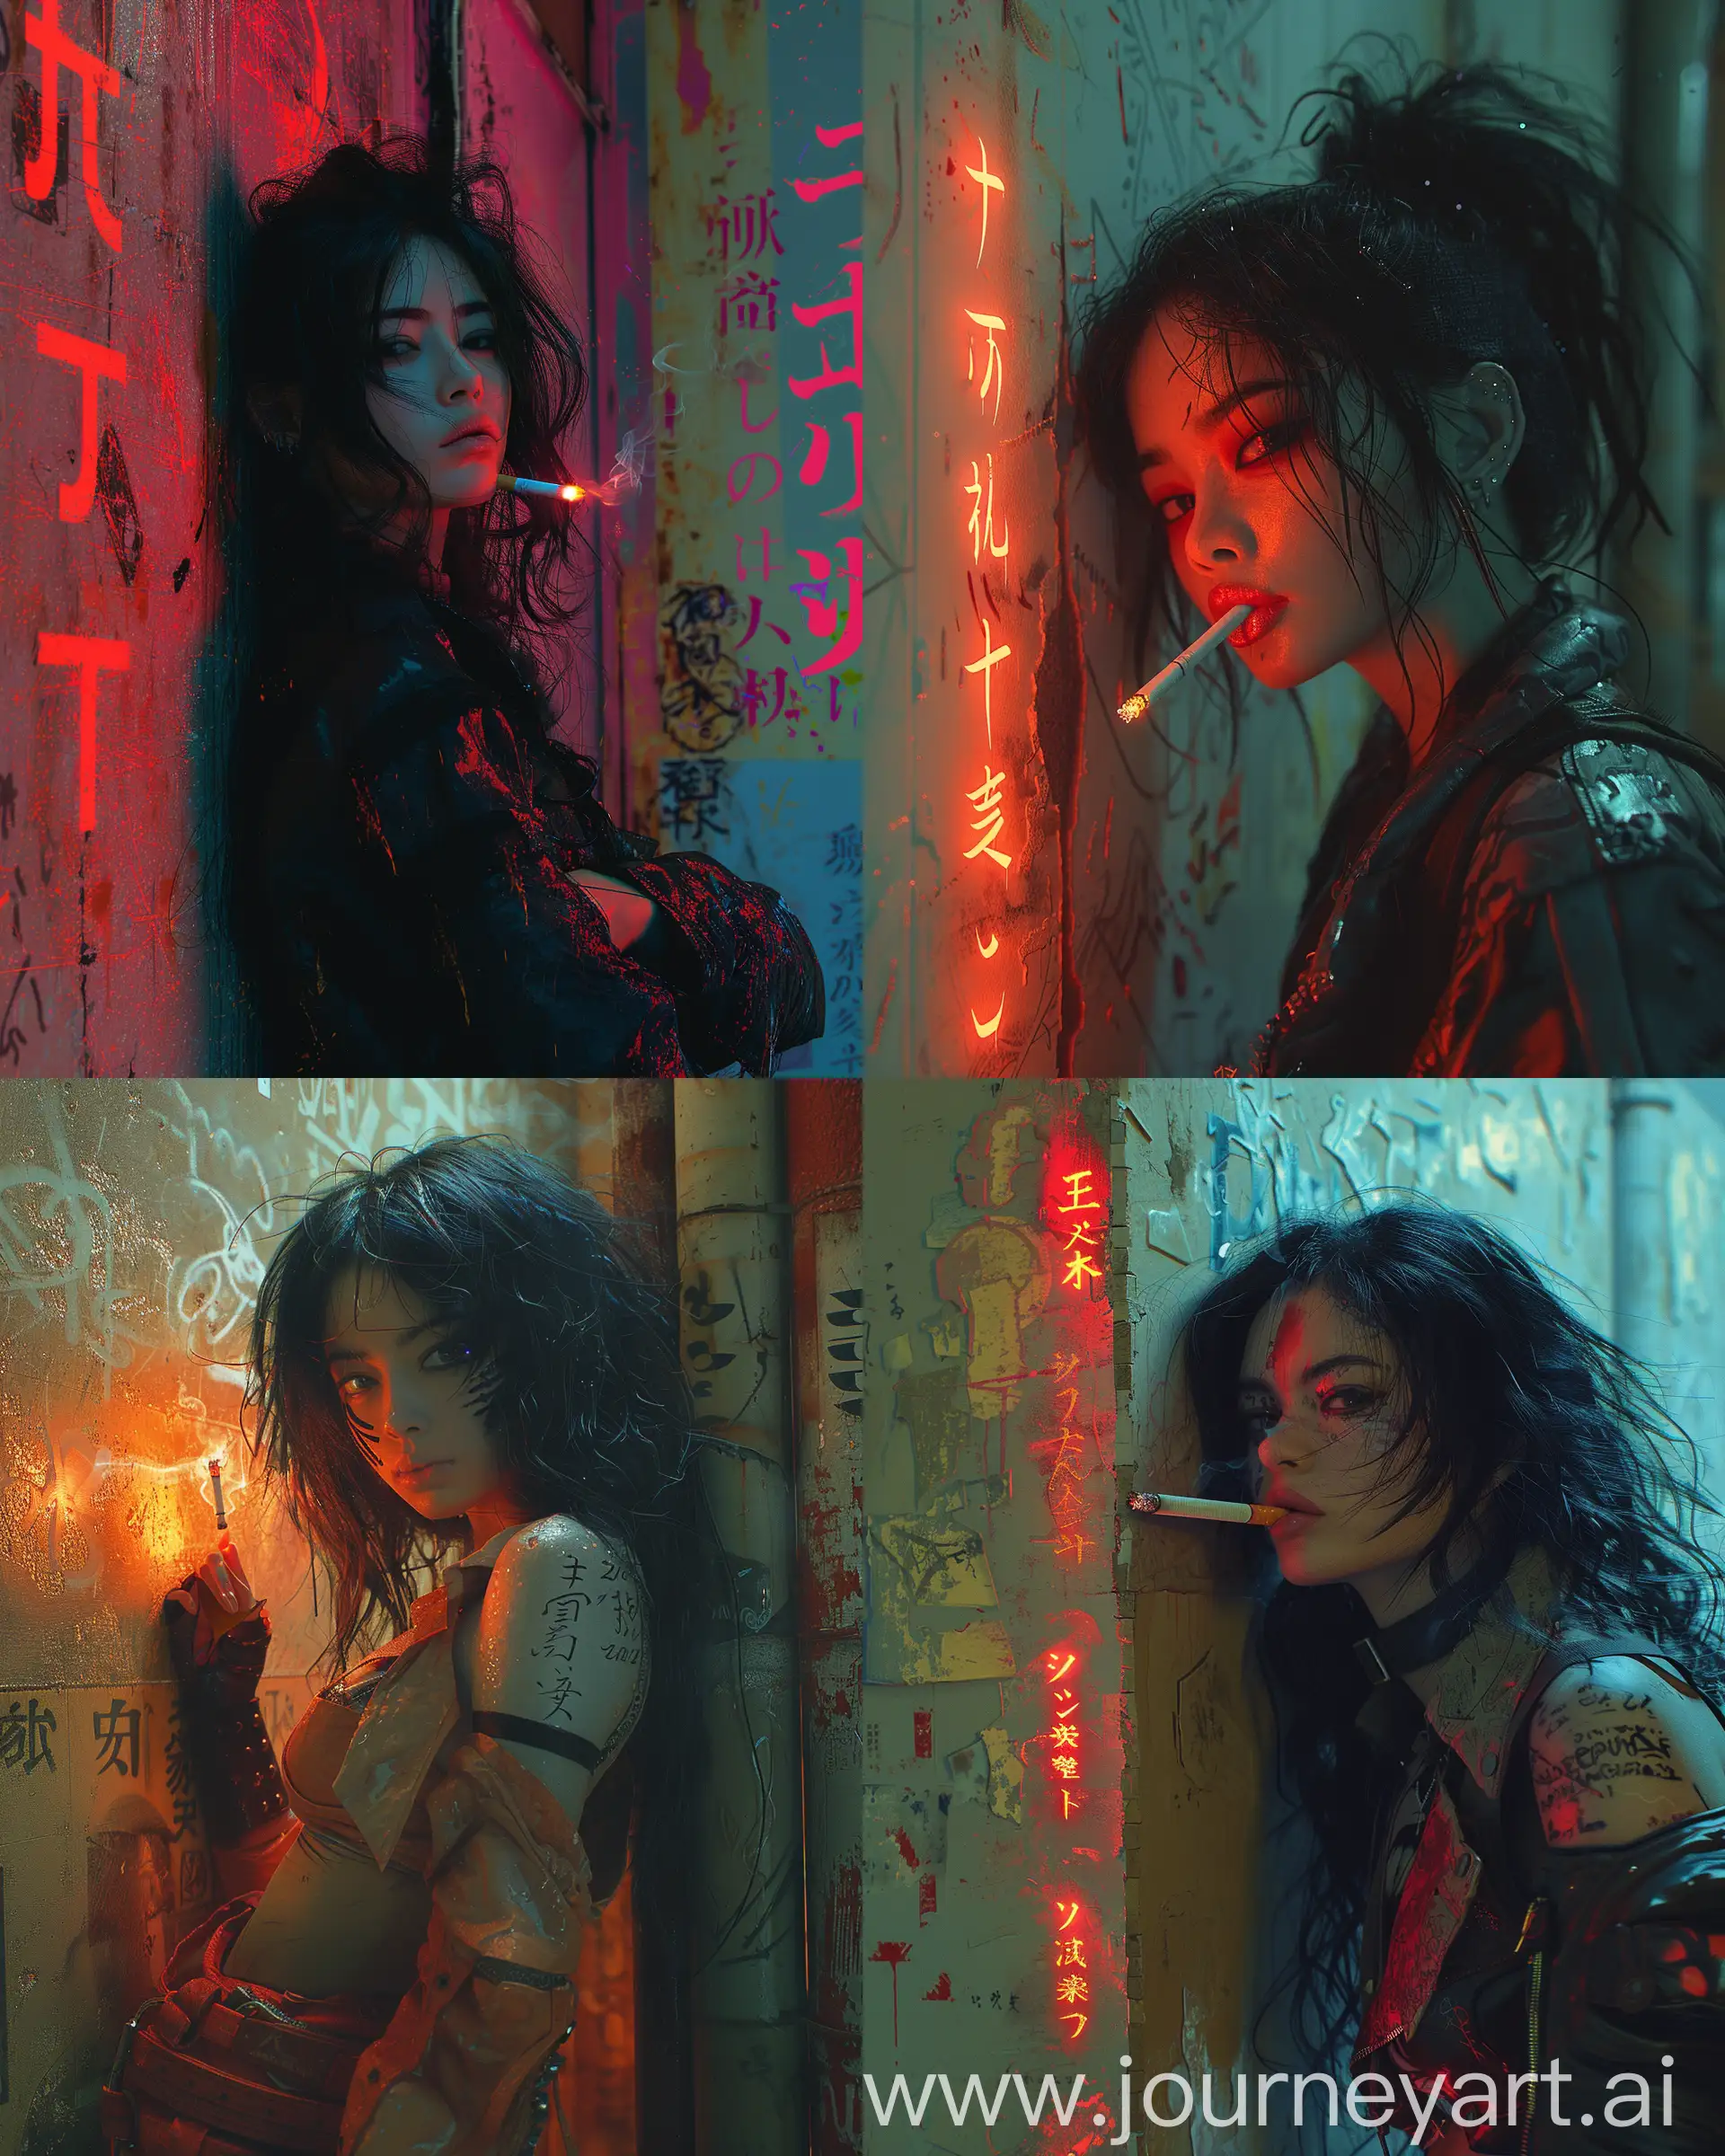 Urban-Punk-Assassin-Leaning-Against-Wall-with-Glowing-Cigarette